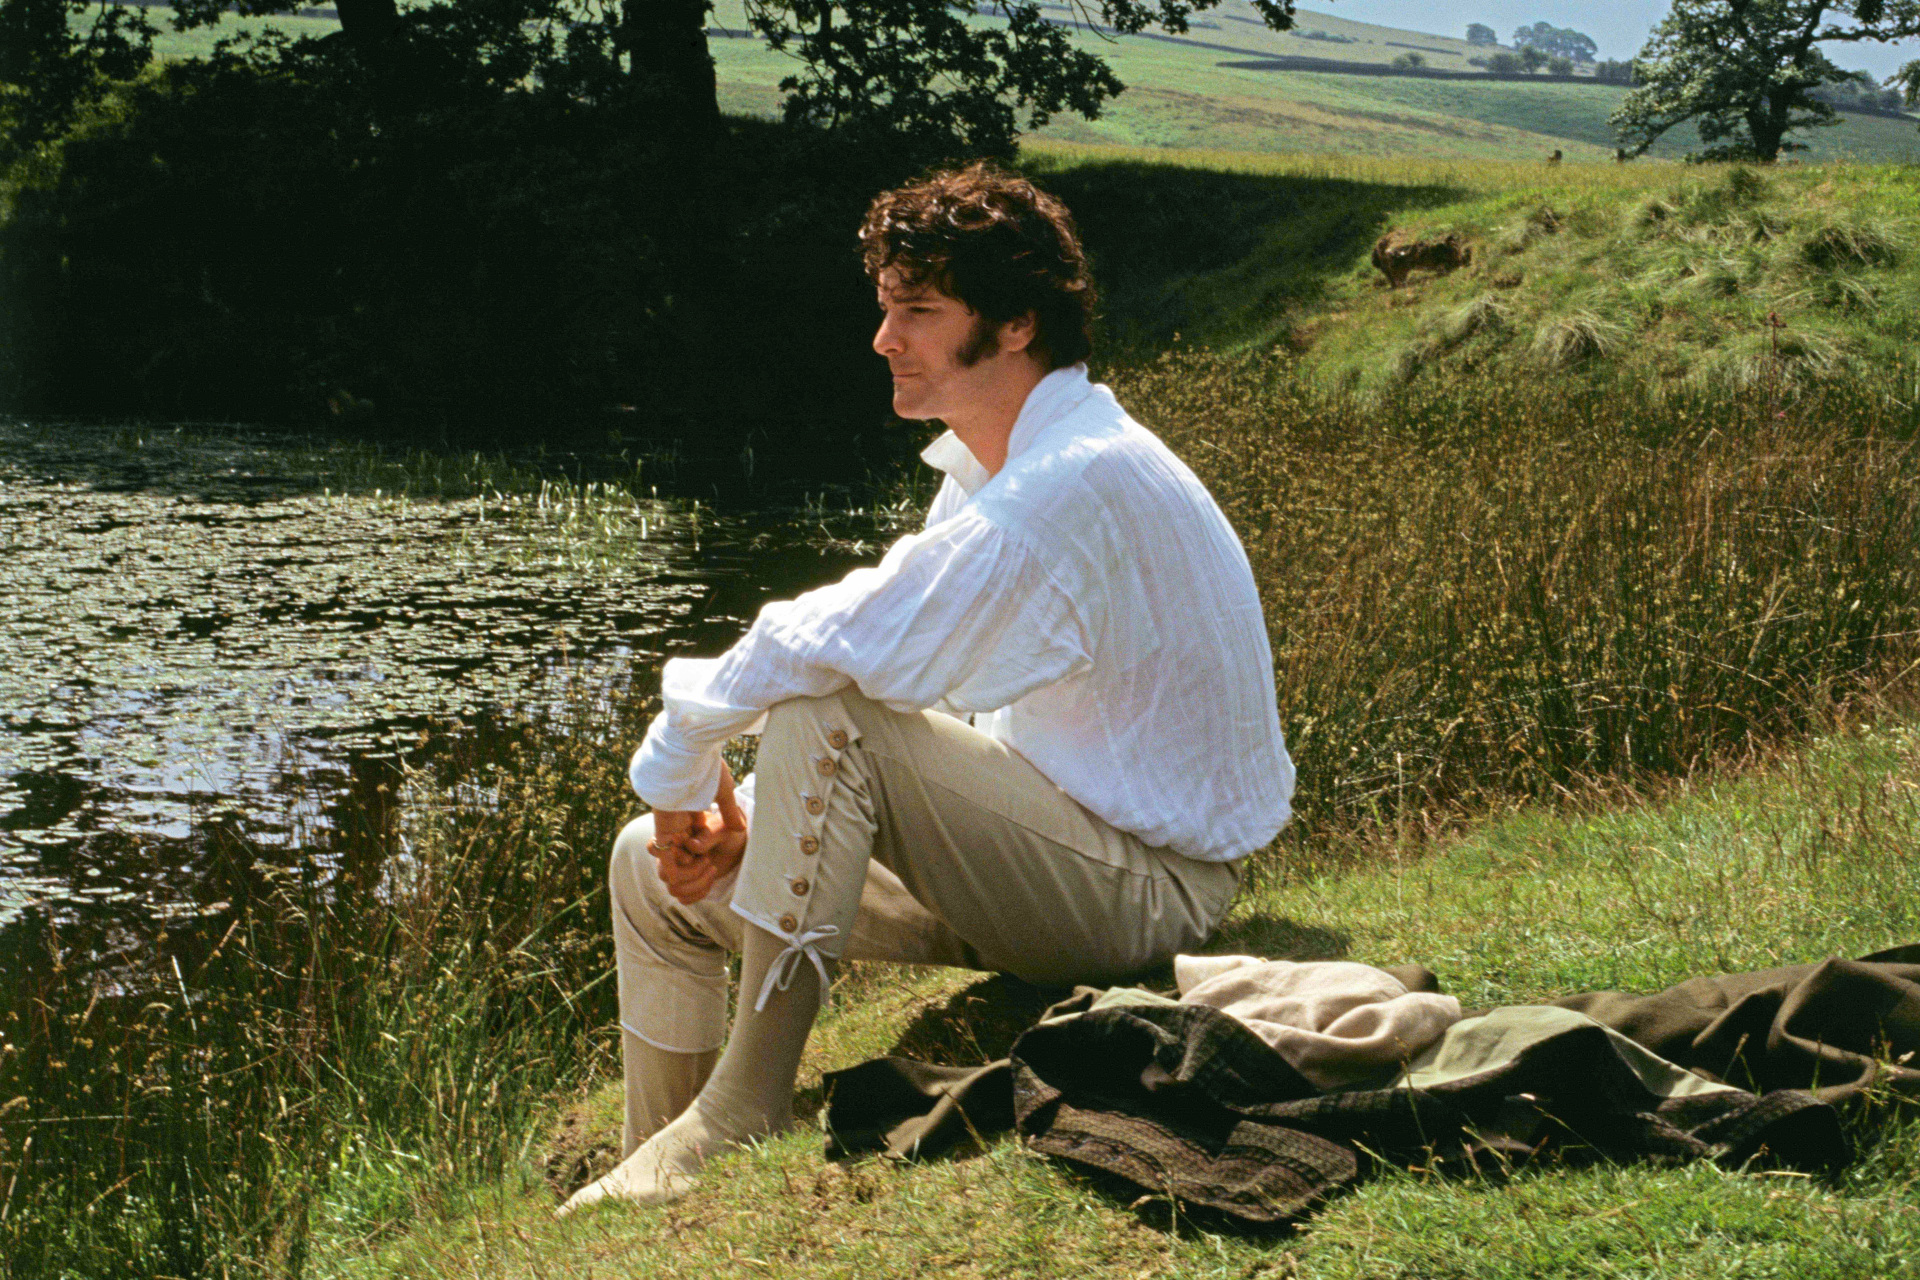 You Can Own Colin Firth's Wet Shirt From Pride & Prejudice Thanks To This Auction